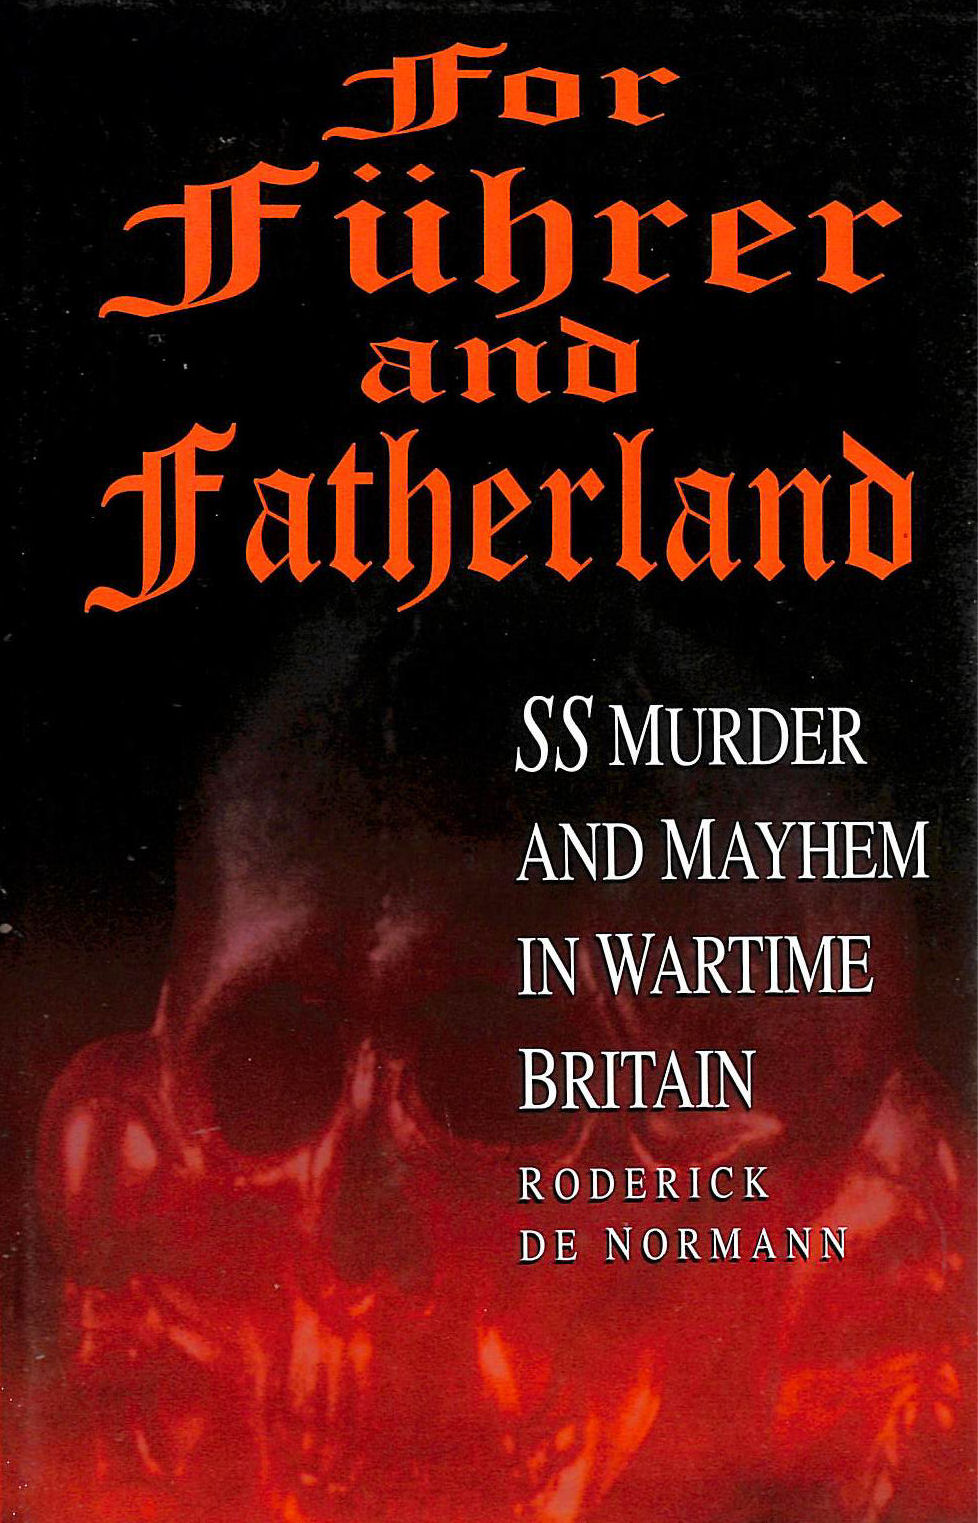 NORMANN, RODERICK - For Fuhrer And Fatherland: Ss Murder And Mayhem In Wartime Britain